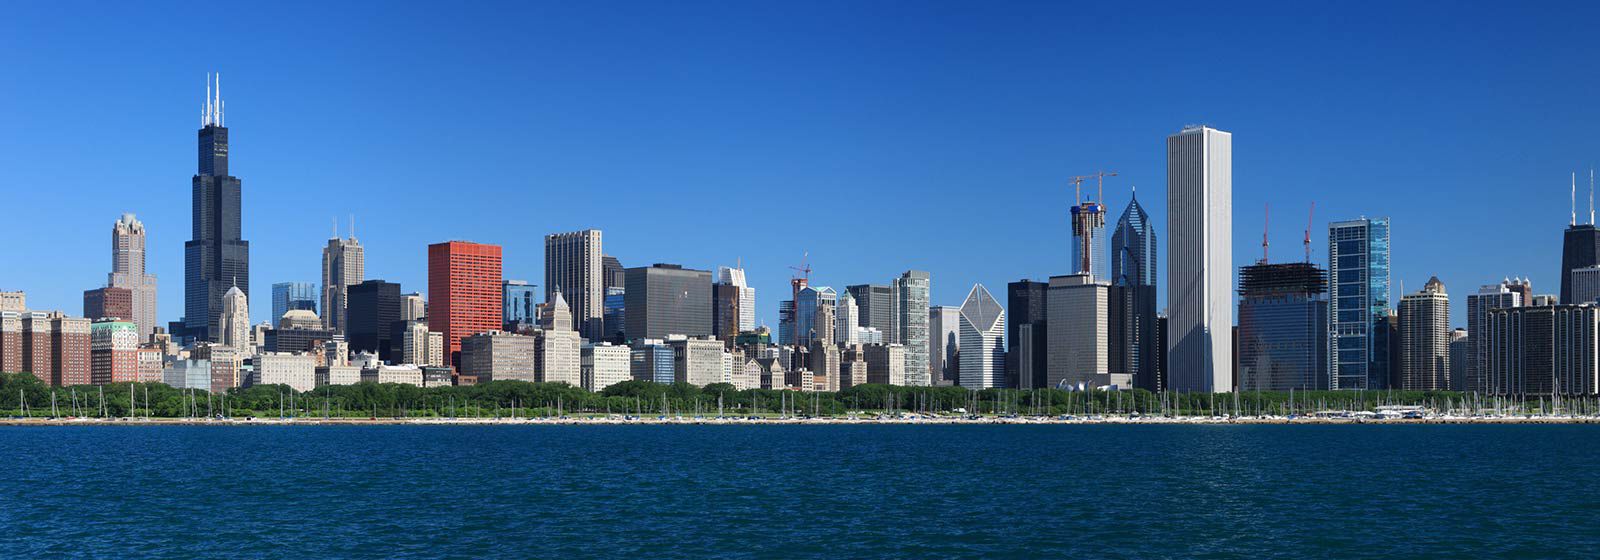 View of the harbor and skyline of Chicago city